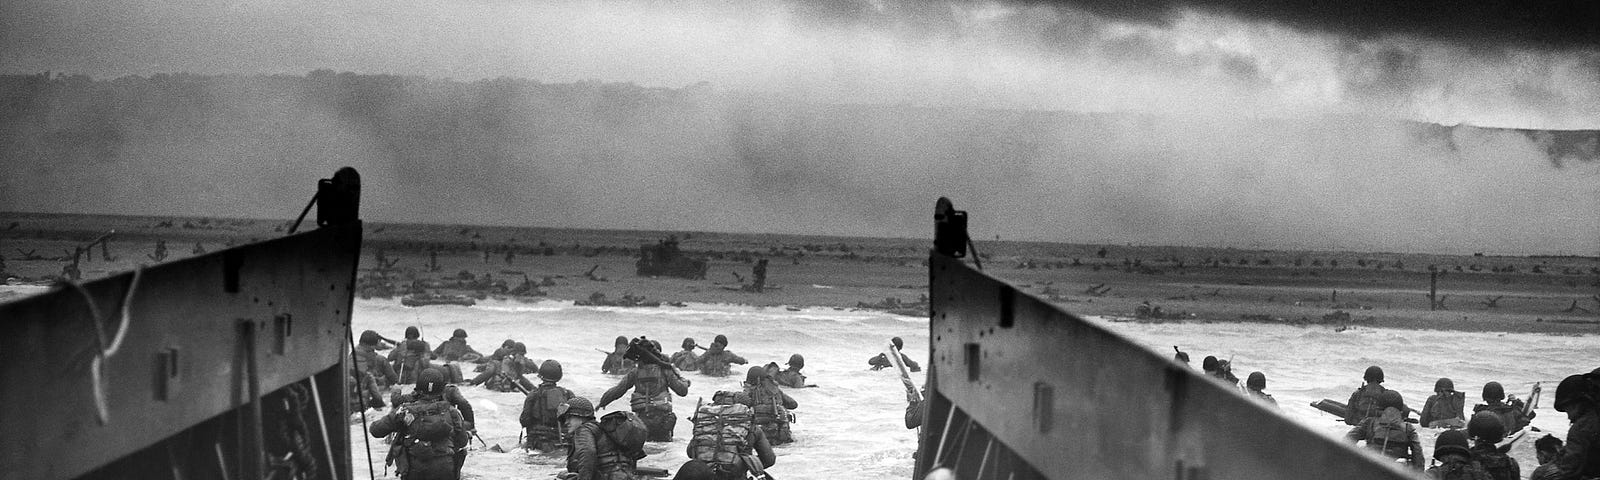 Soldiers leaving landing craft on D-Day